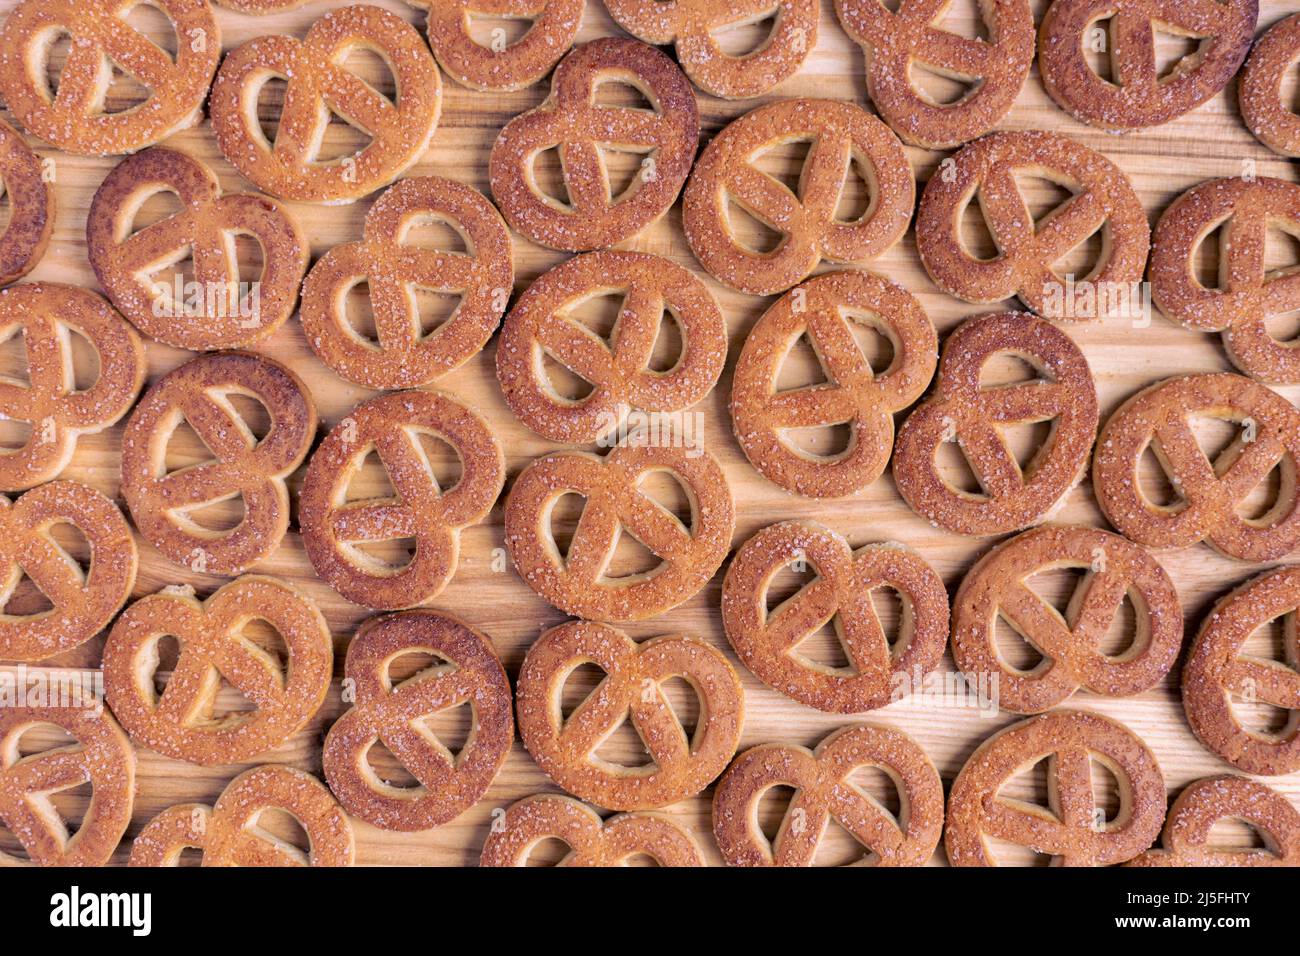 Pretzels sprinkled with sugar lie on a wooden surface Stock Photo